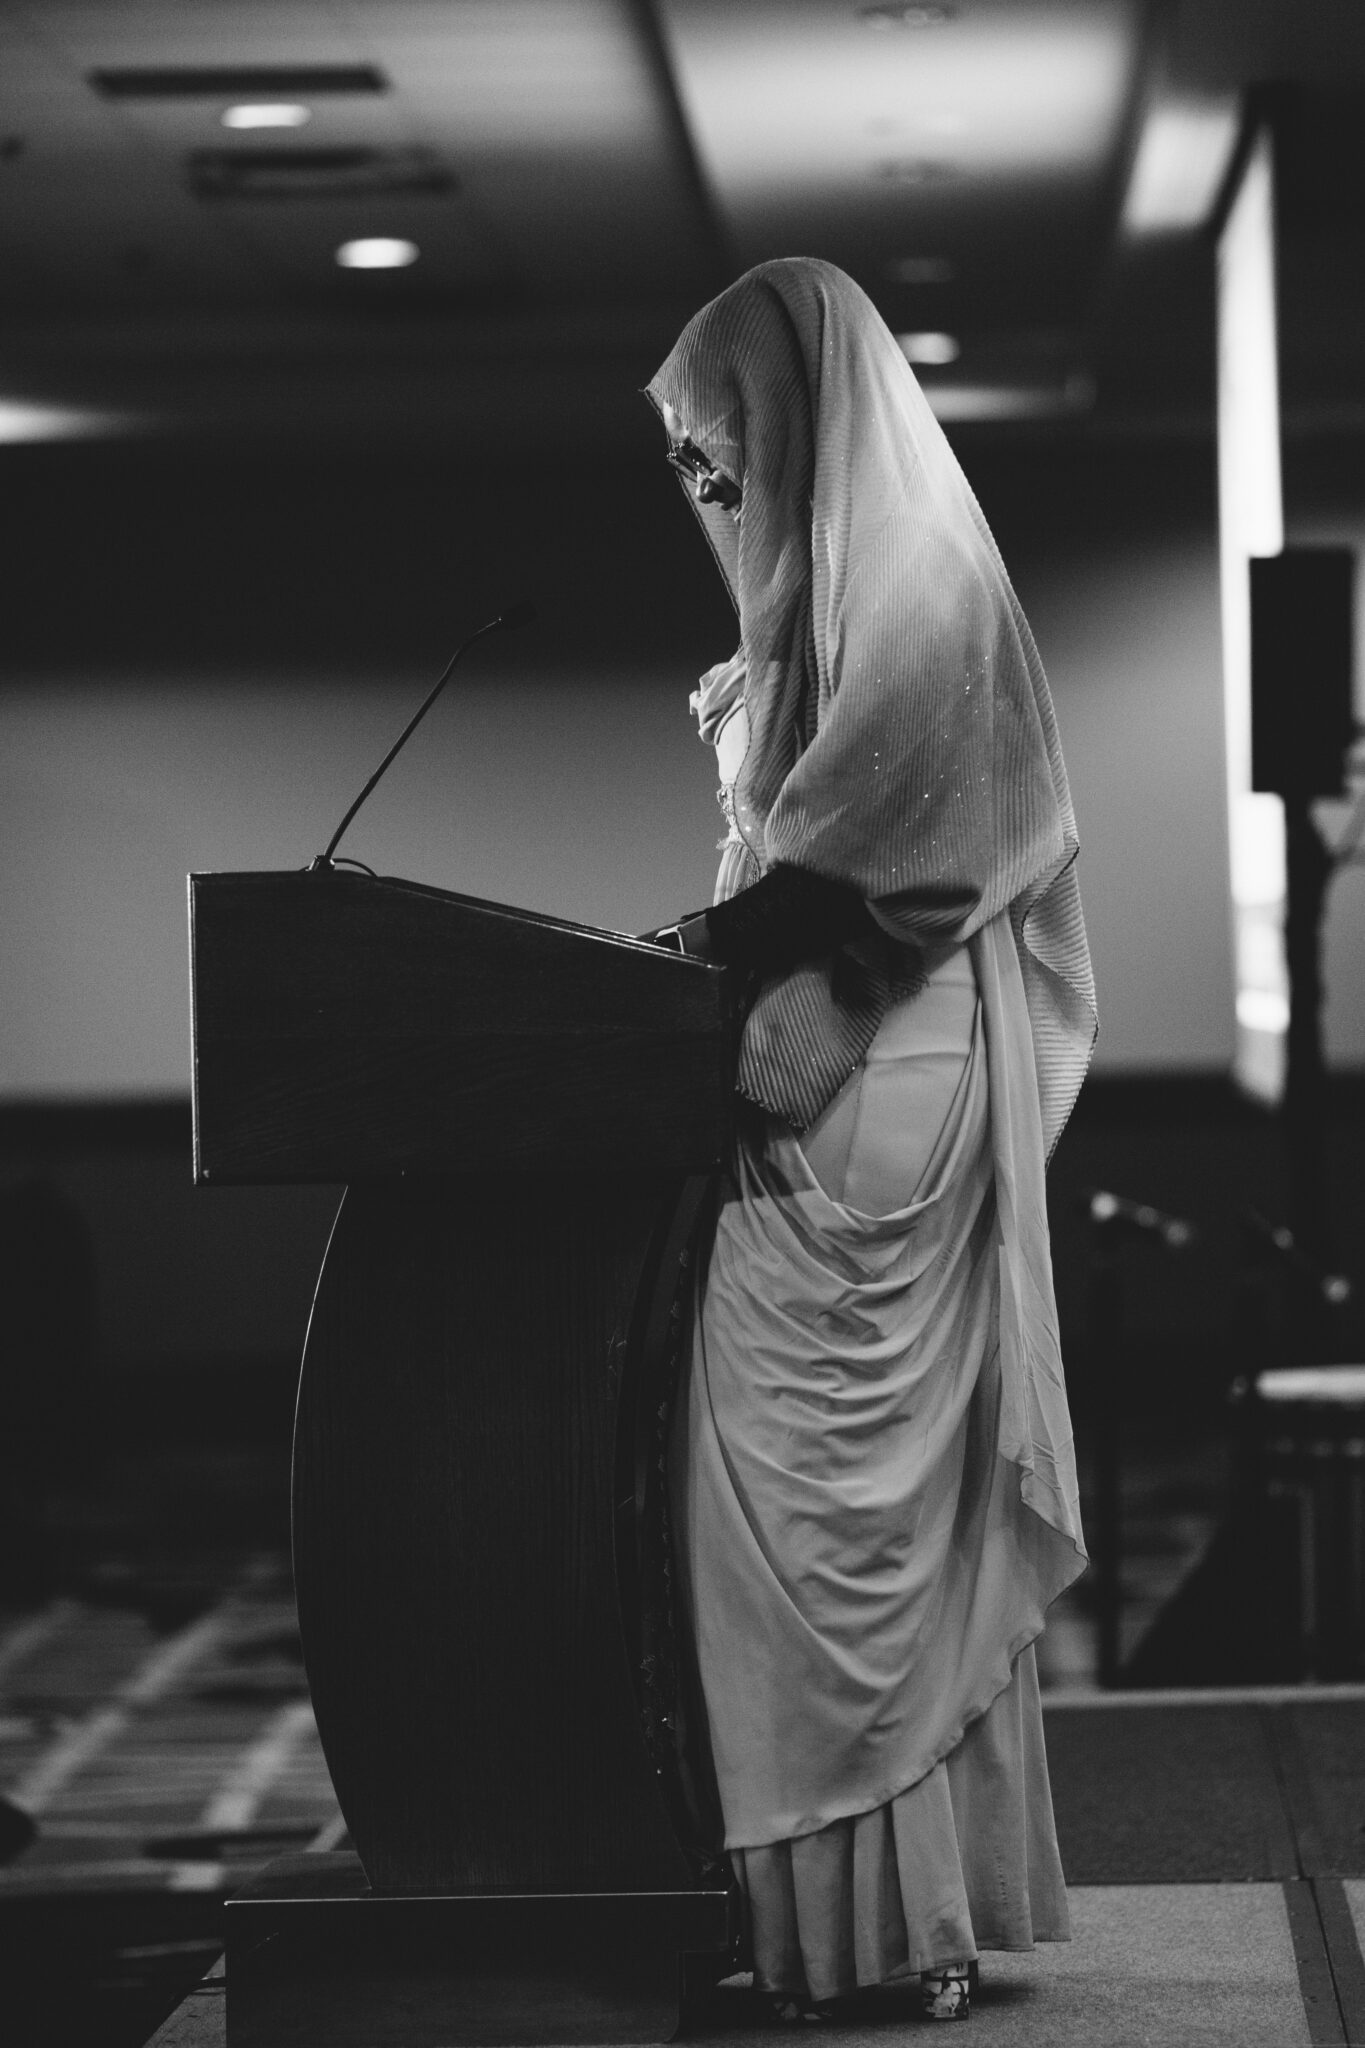 A young woman in traditional Muslim clothing stands smiling at a podium reading a speech.